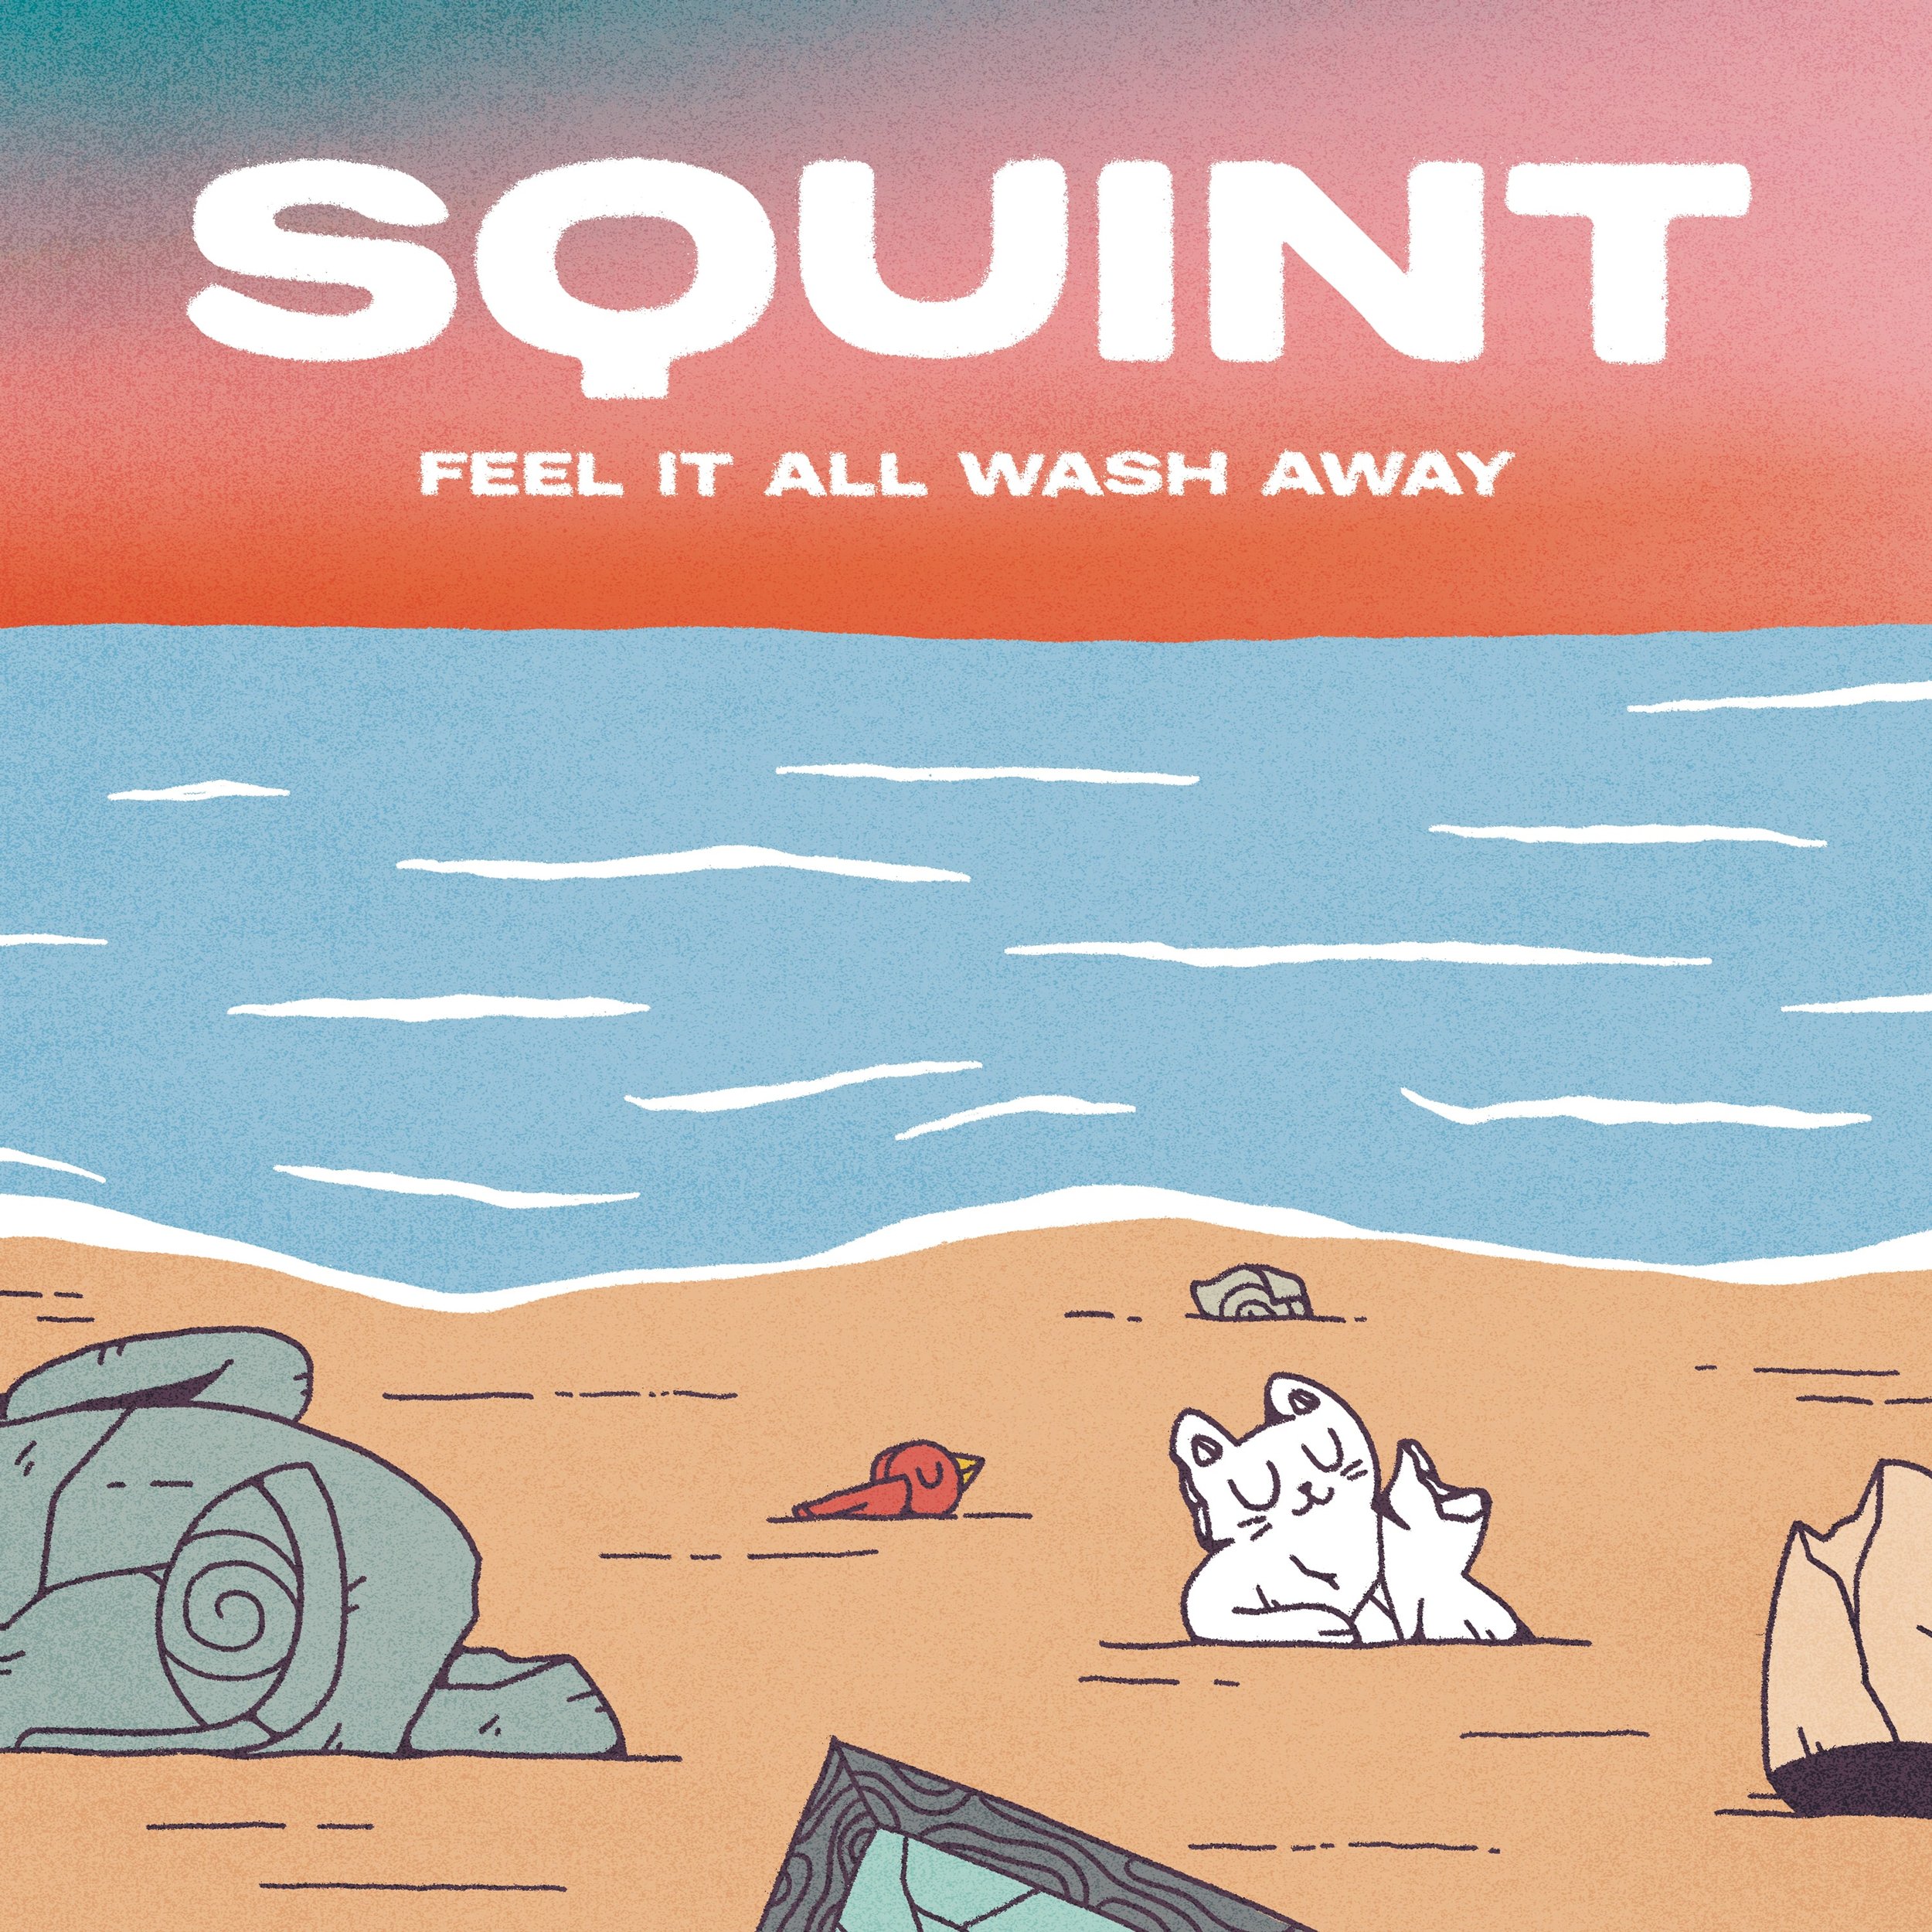 Squint - Feel It All Wash Away - Cover.jpg